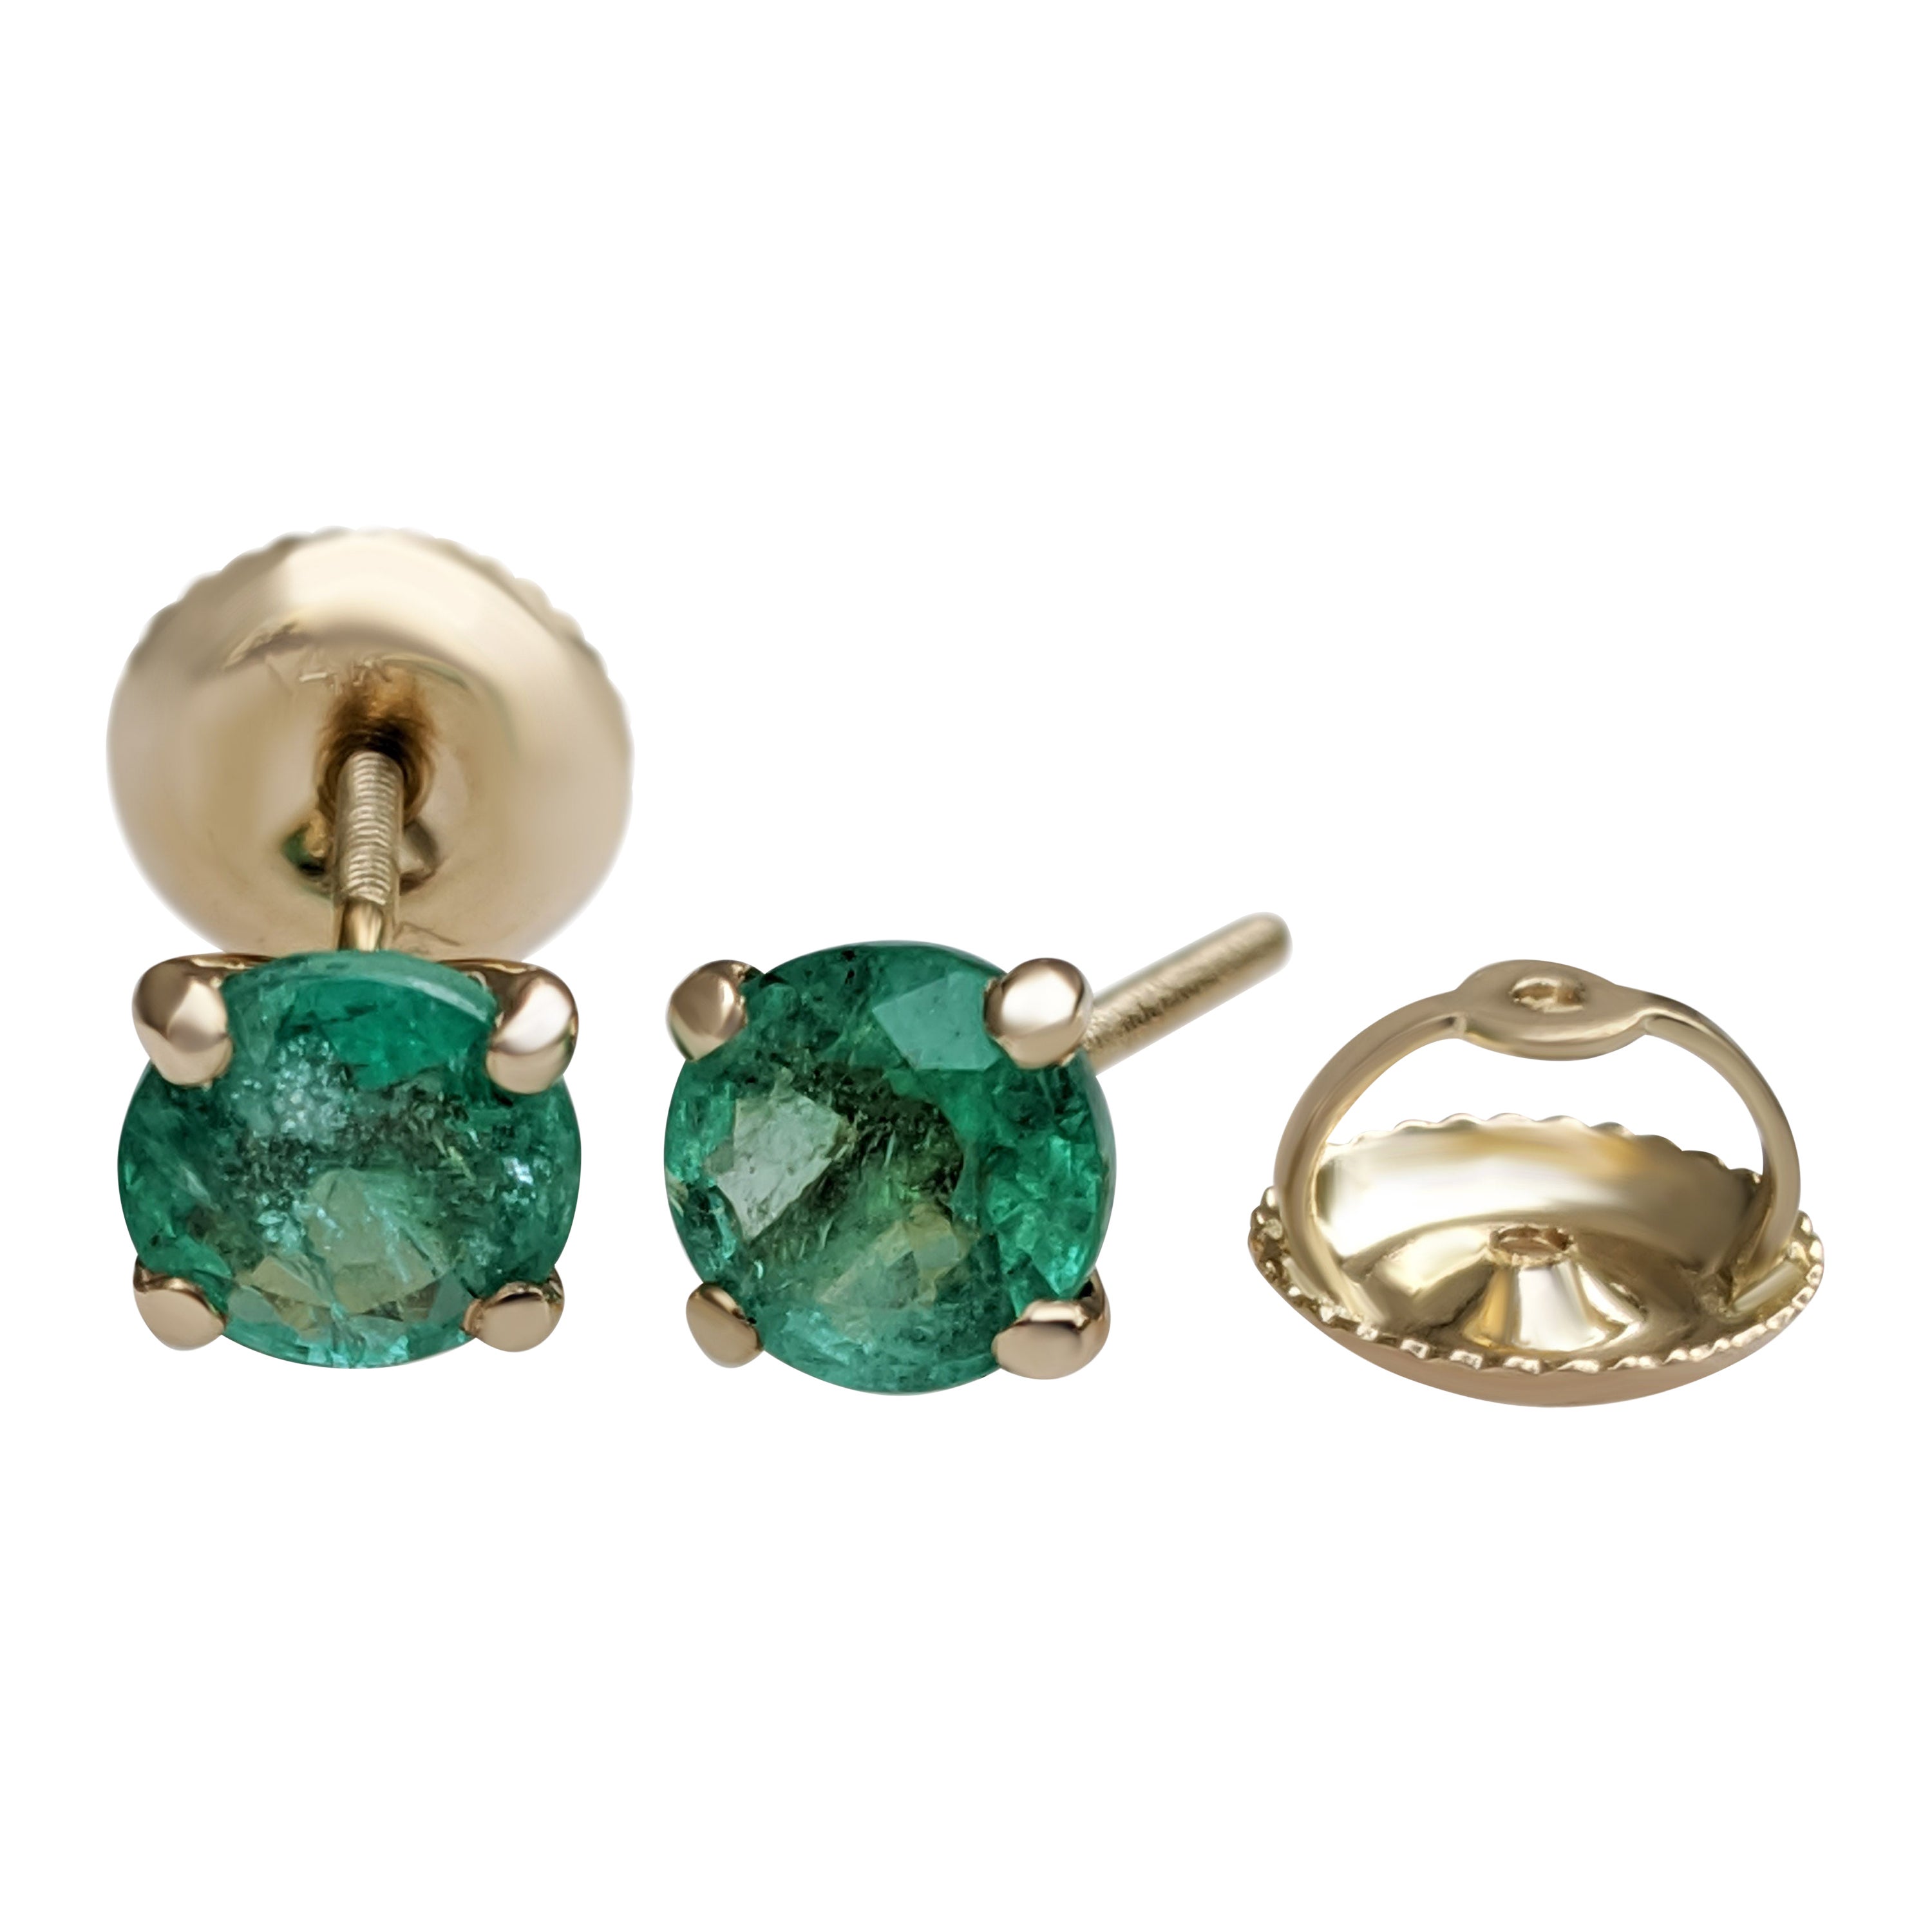 NO RESERVE! 1.04 Ct Emerald - 14 kt. Yellow gold - Earrings For Sale